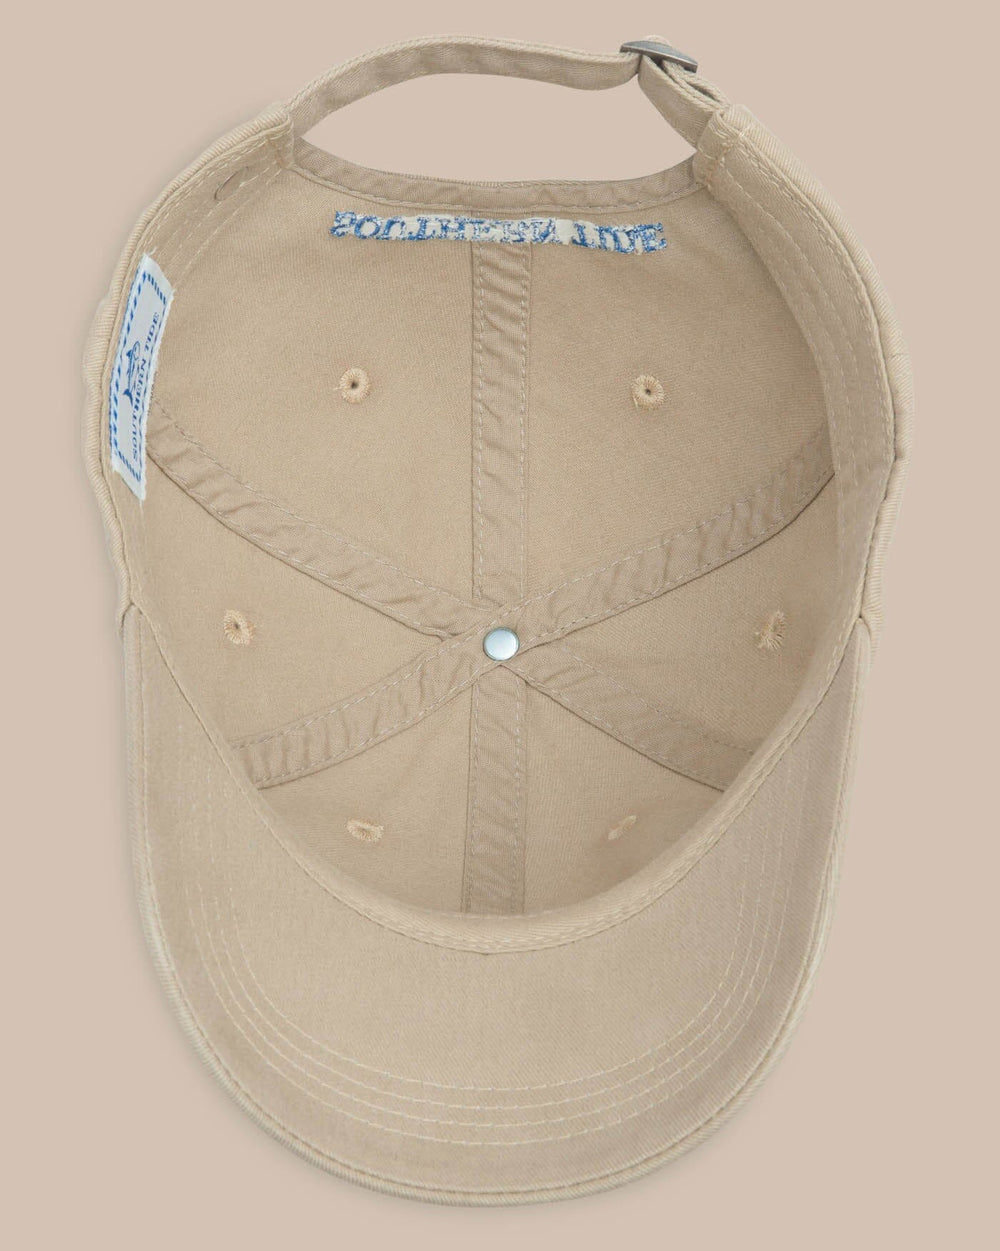 The inside of the Skipjack Hat by Southern Tide - Khaki